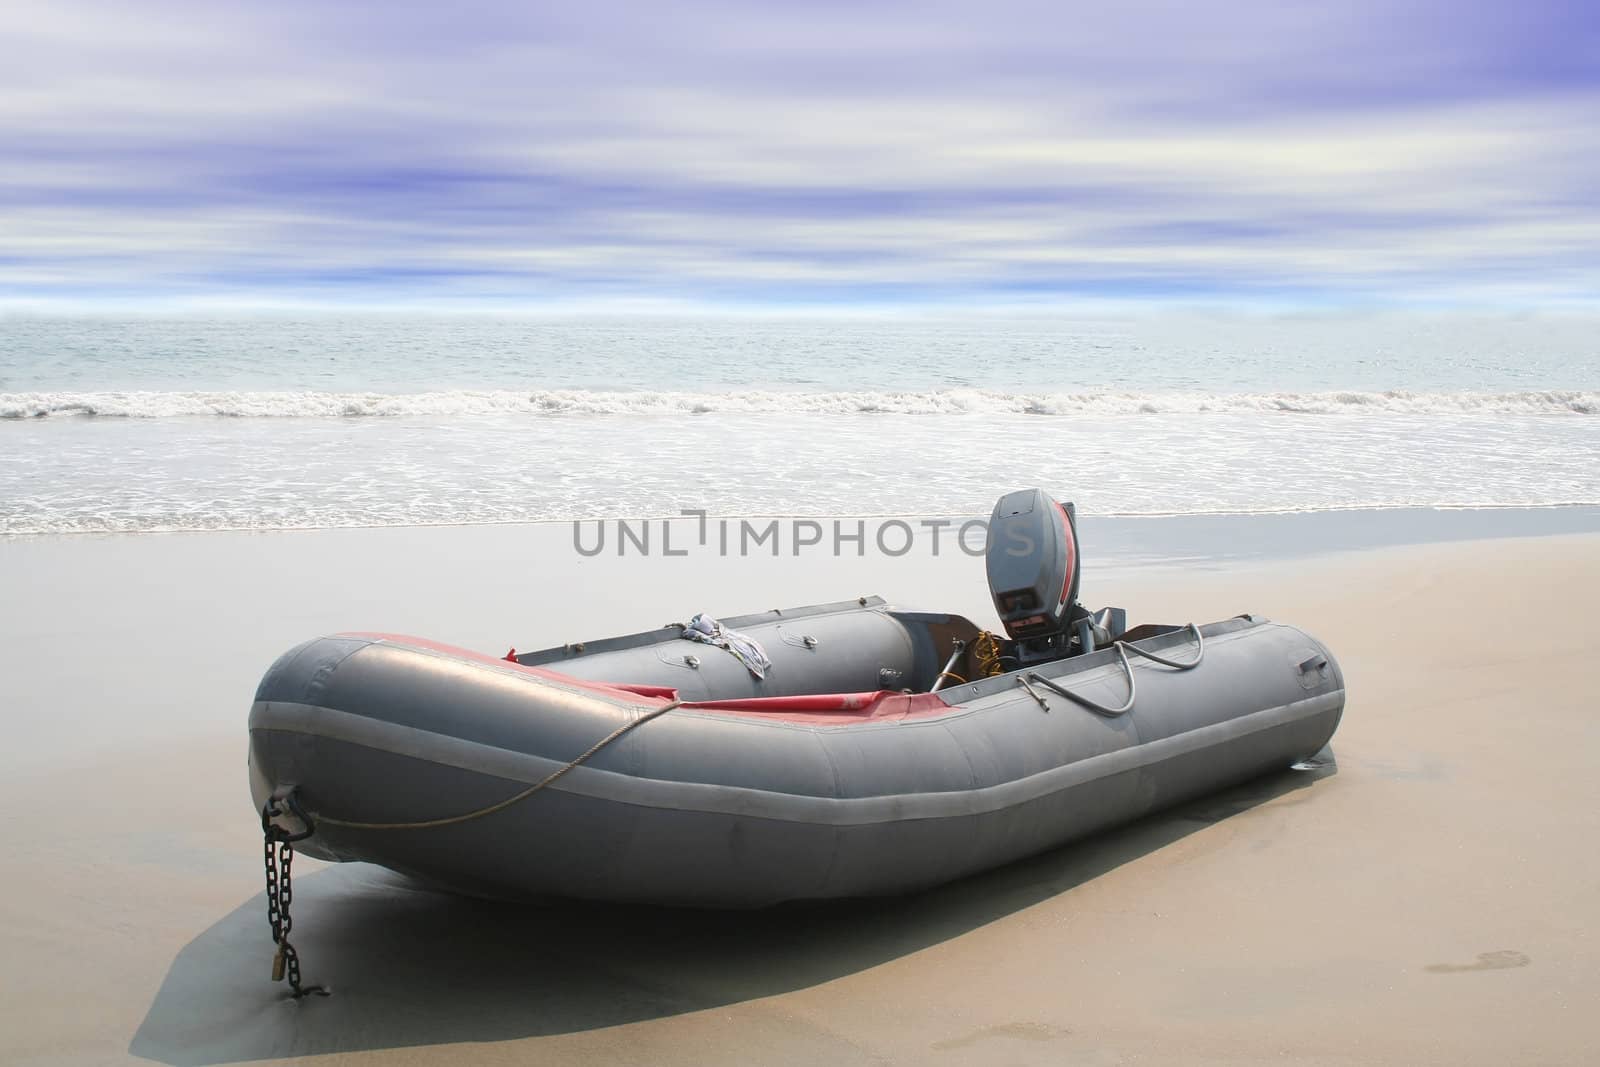 Beached inflatable boat with ocean waves in background